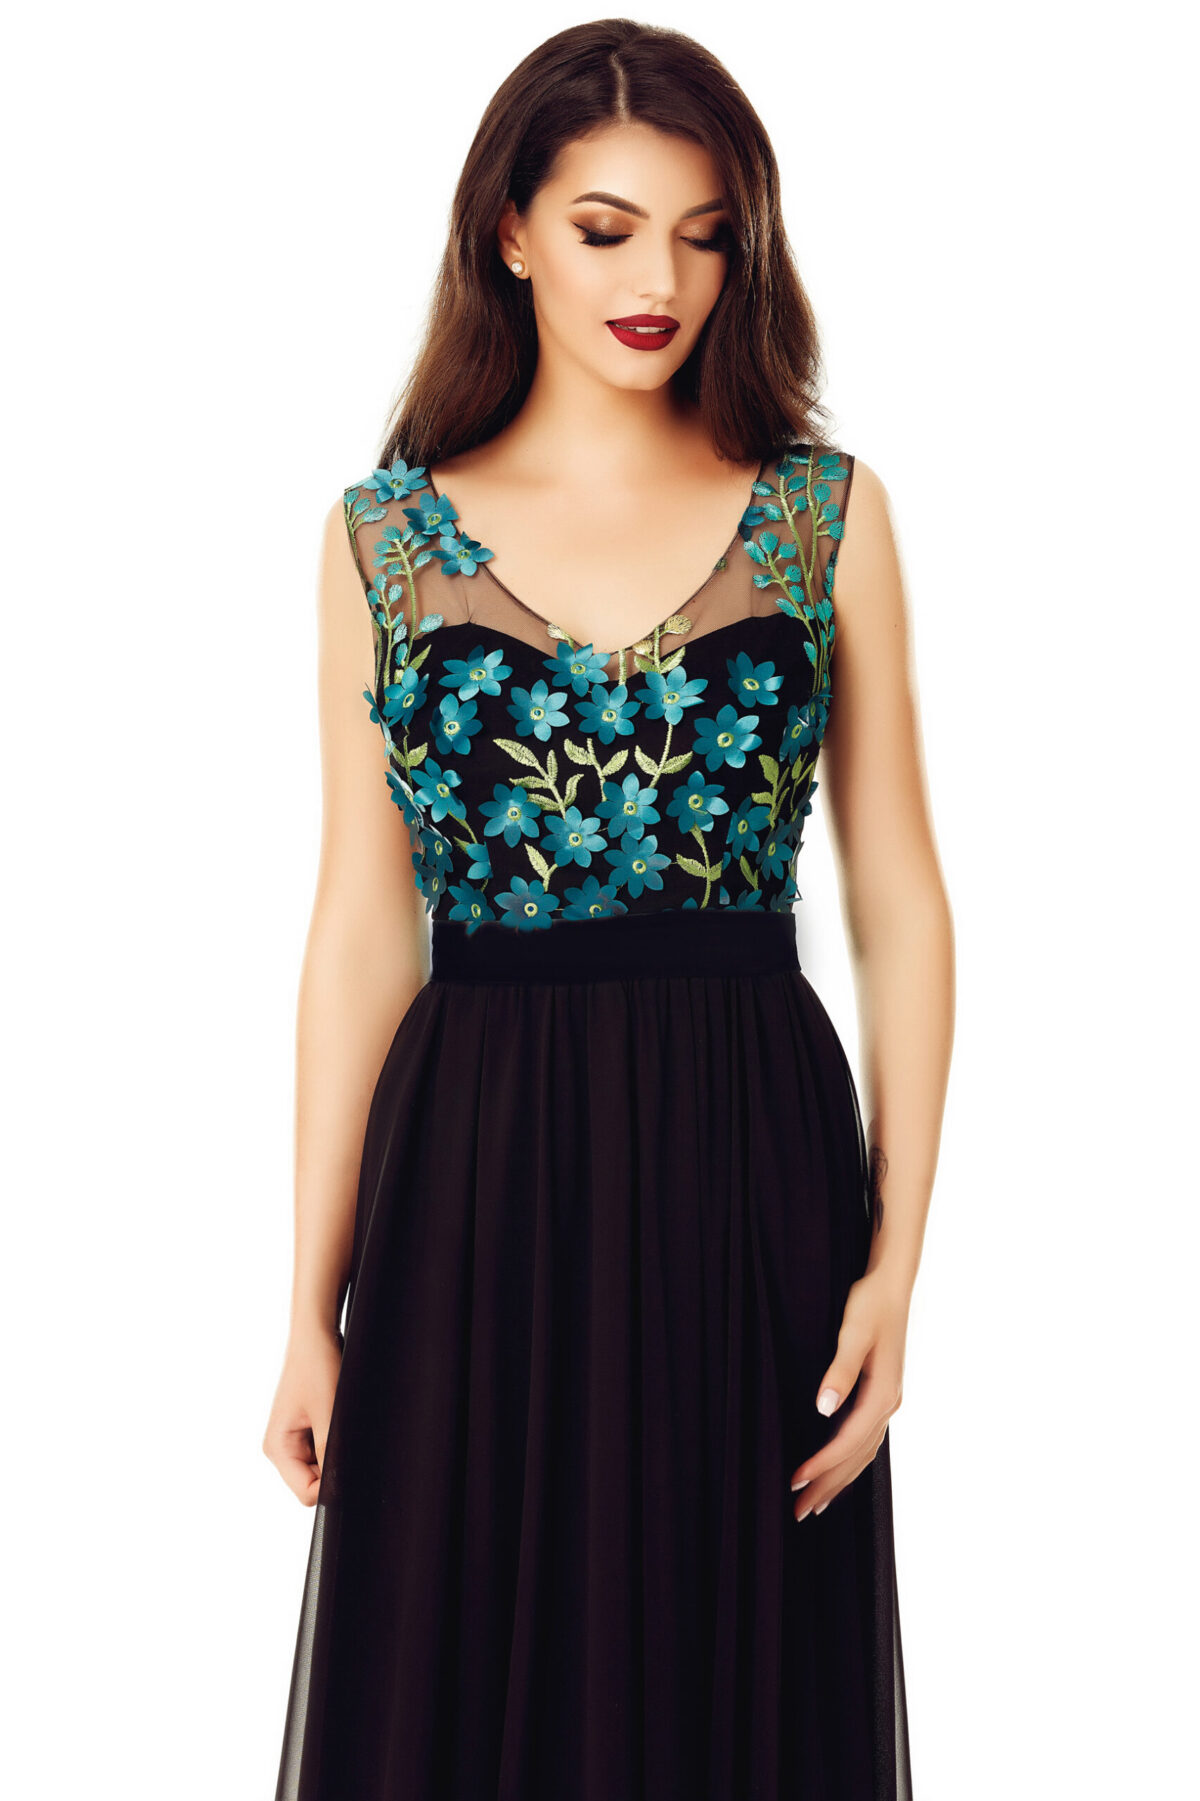 Long Black Dress Of Voile With Delicate Lace Bust And Turquoise Flowers